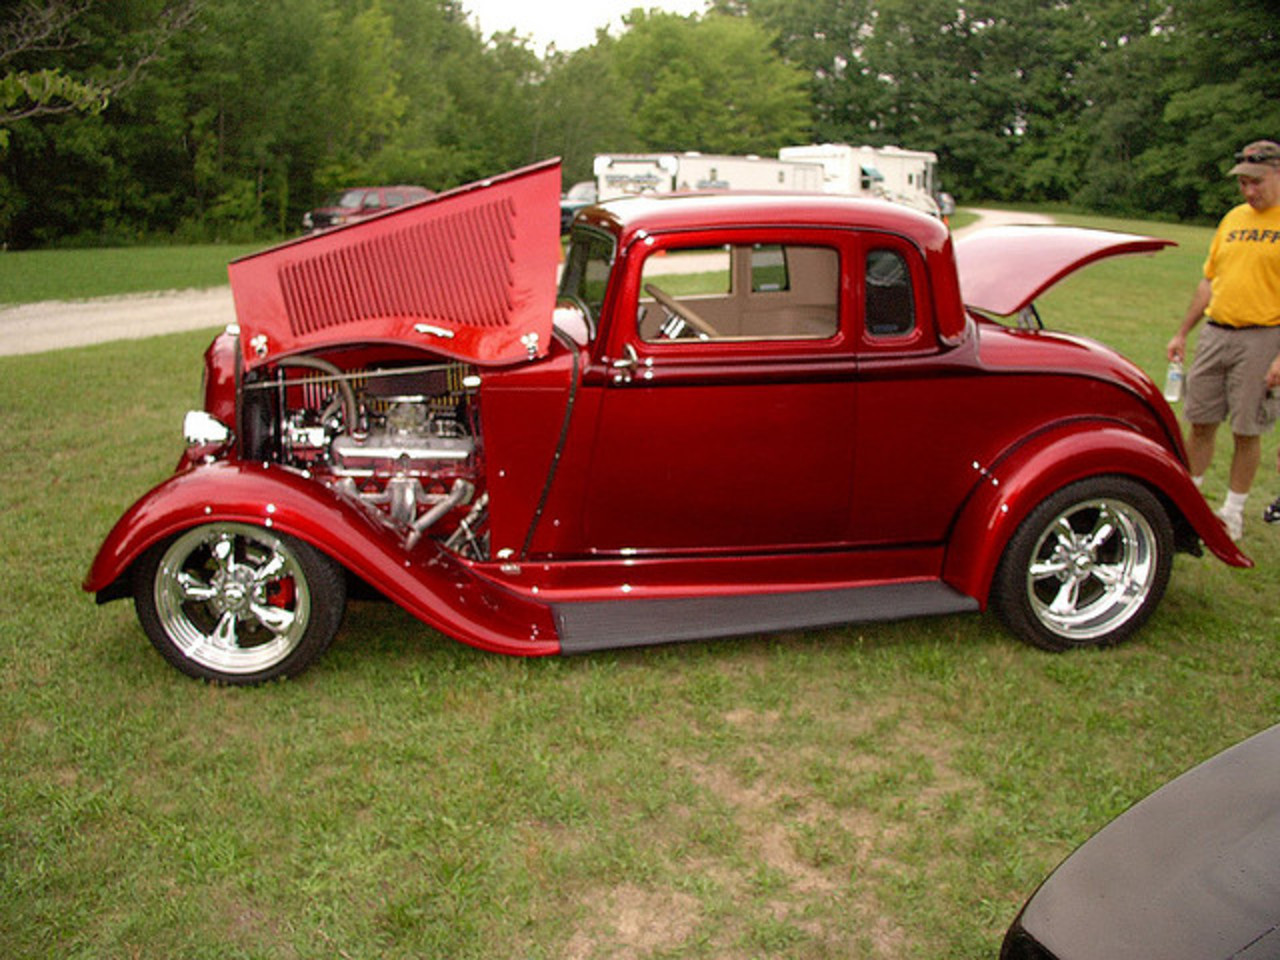 1933 Dodge Coupe | Flickr - Photo Sharing!